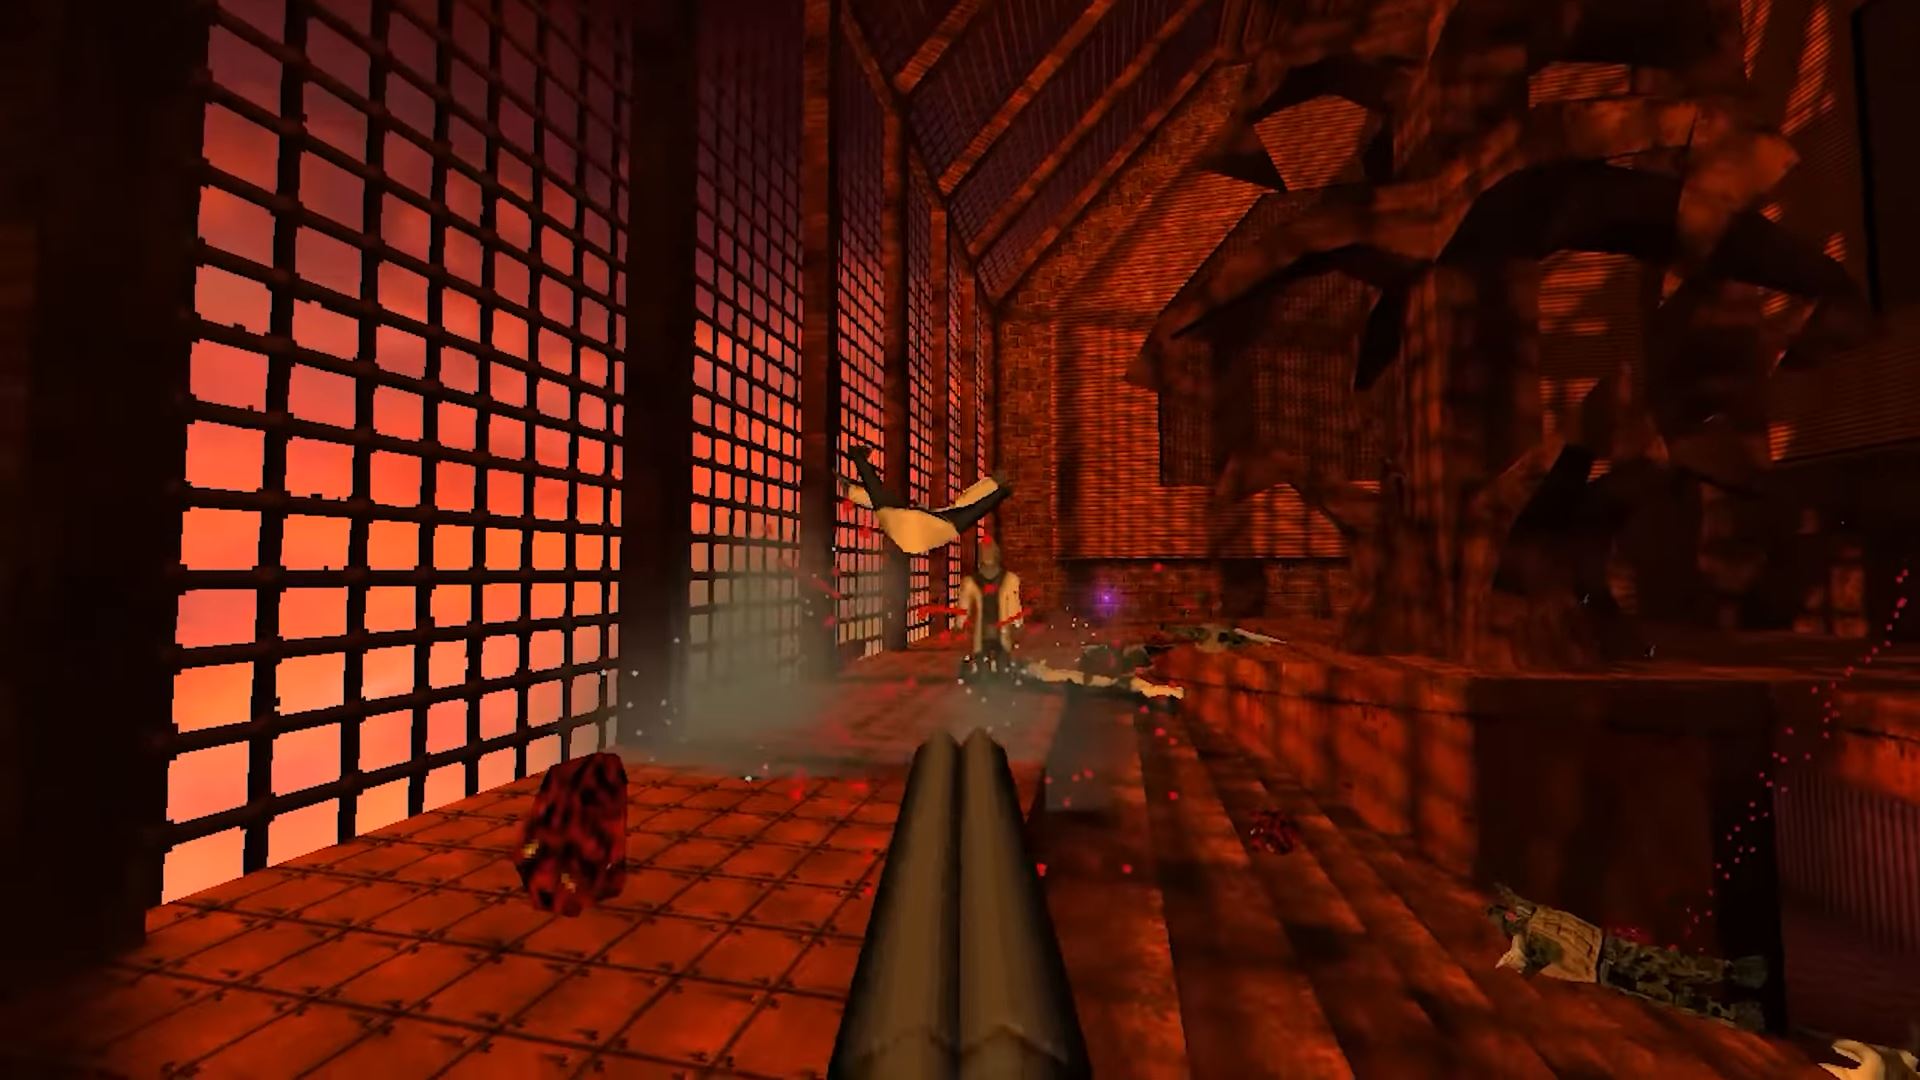 Dusk, a retro FPS that is one of New Blood's best-known titles